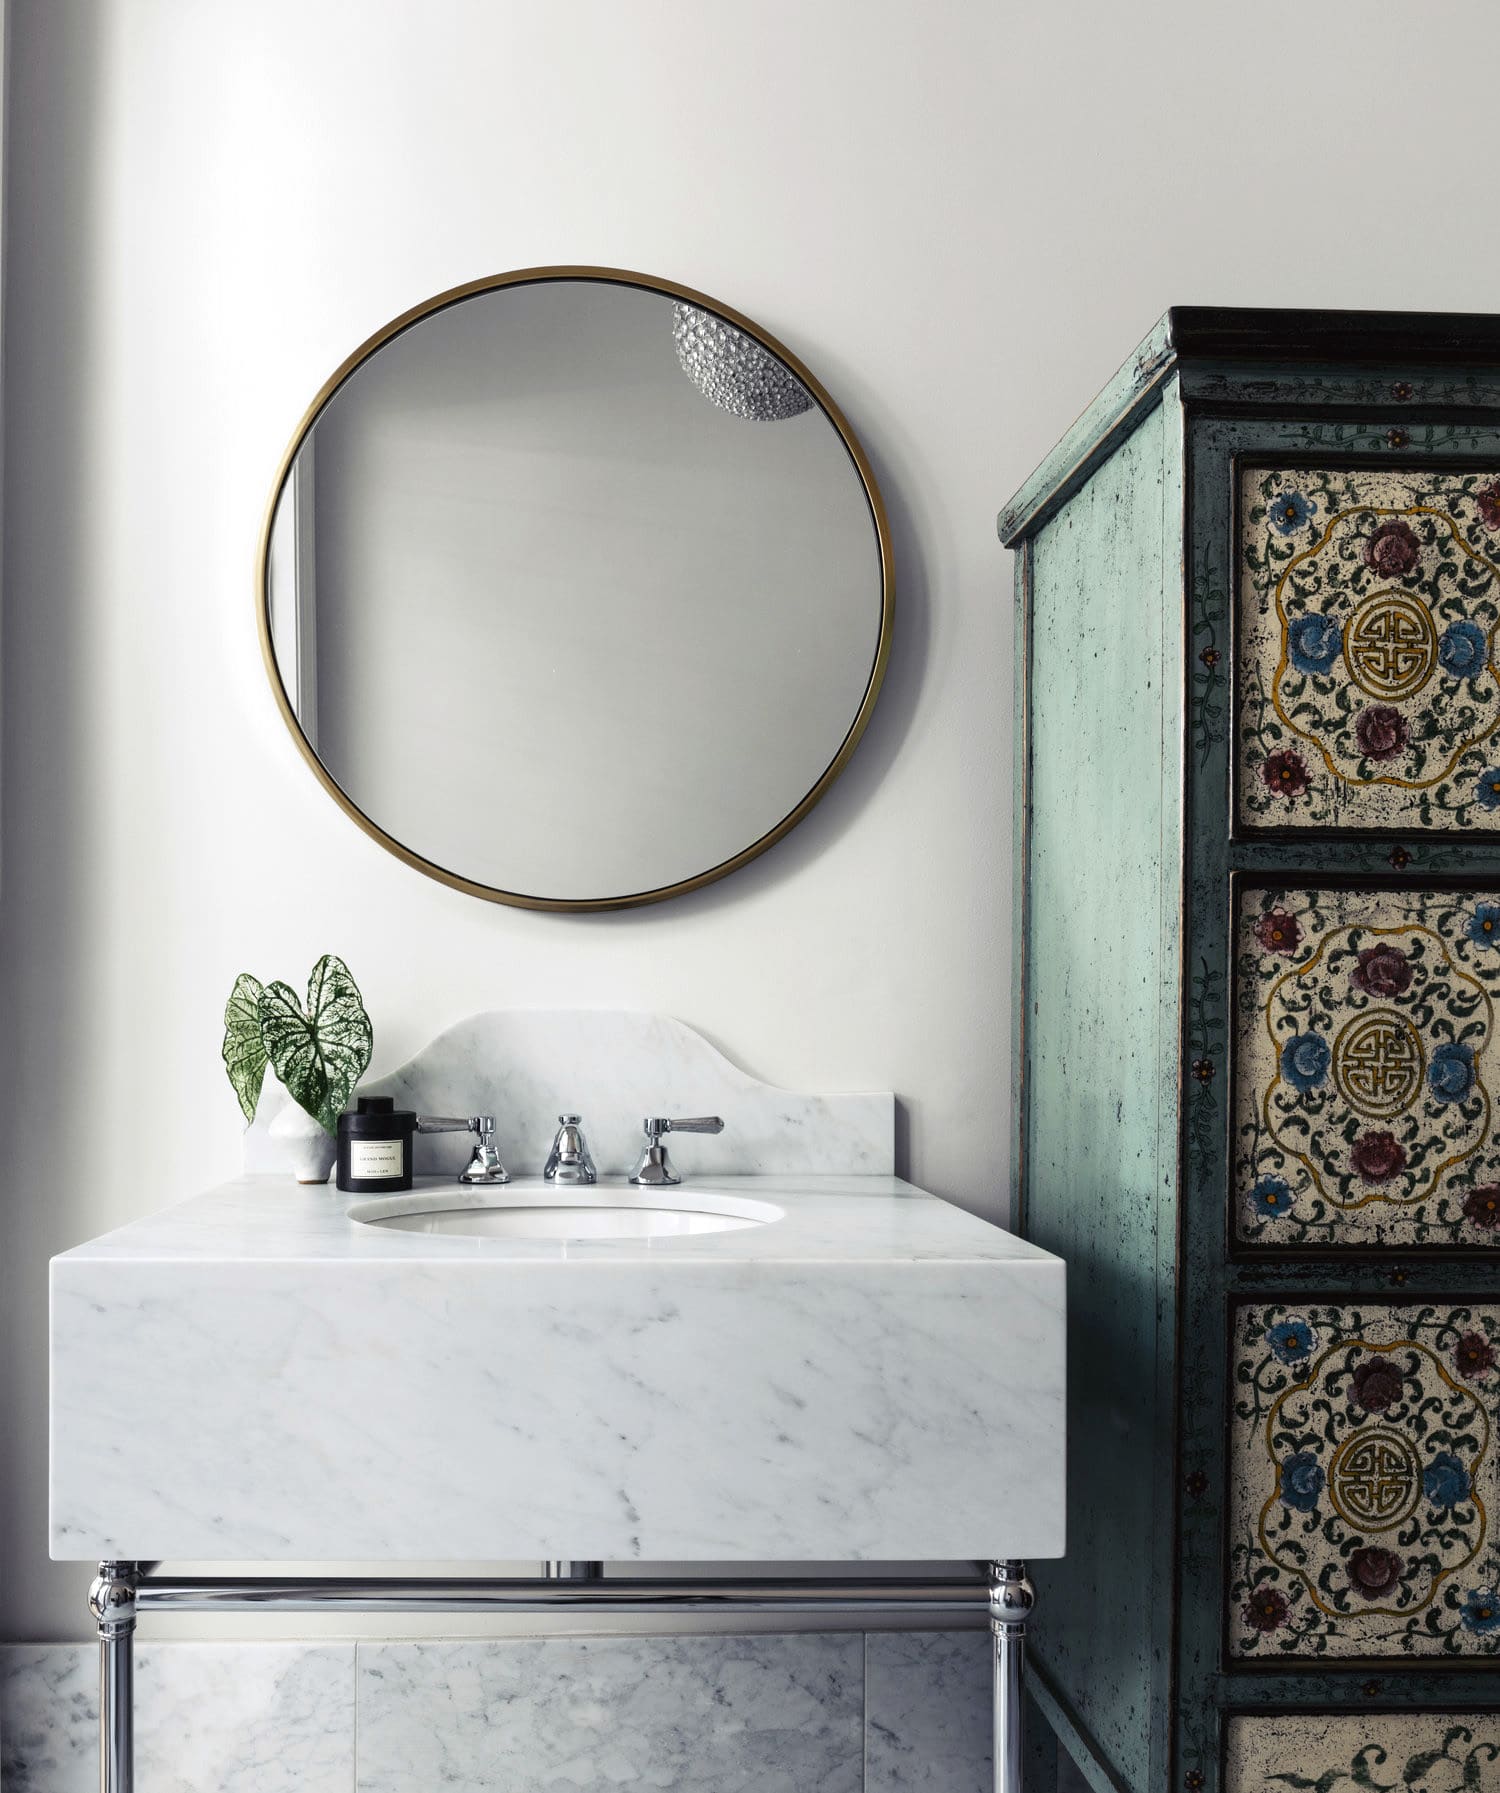 gorgeous marble sink and antique chest in the bath | house tour on coco kelley